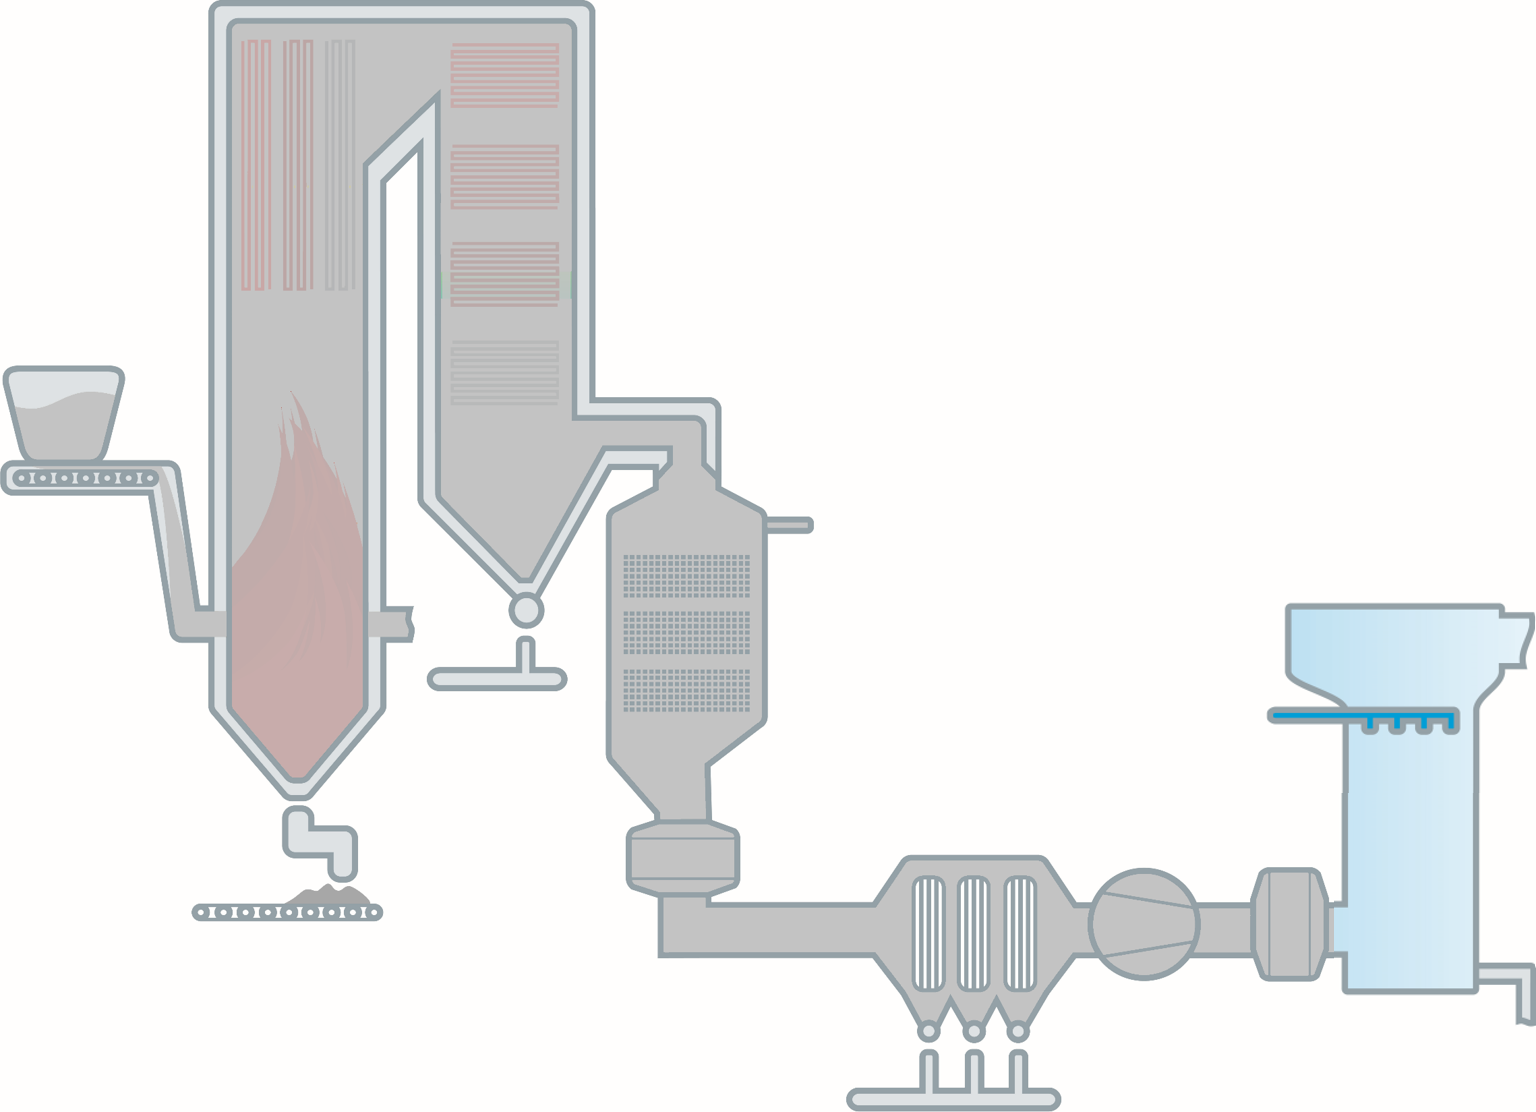 A selective catalyst reduction (SCR) system in boiler